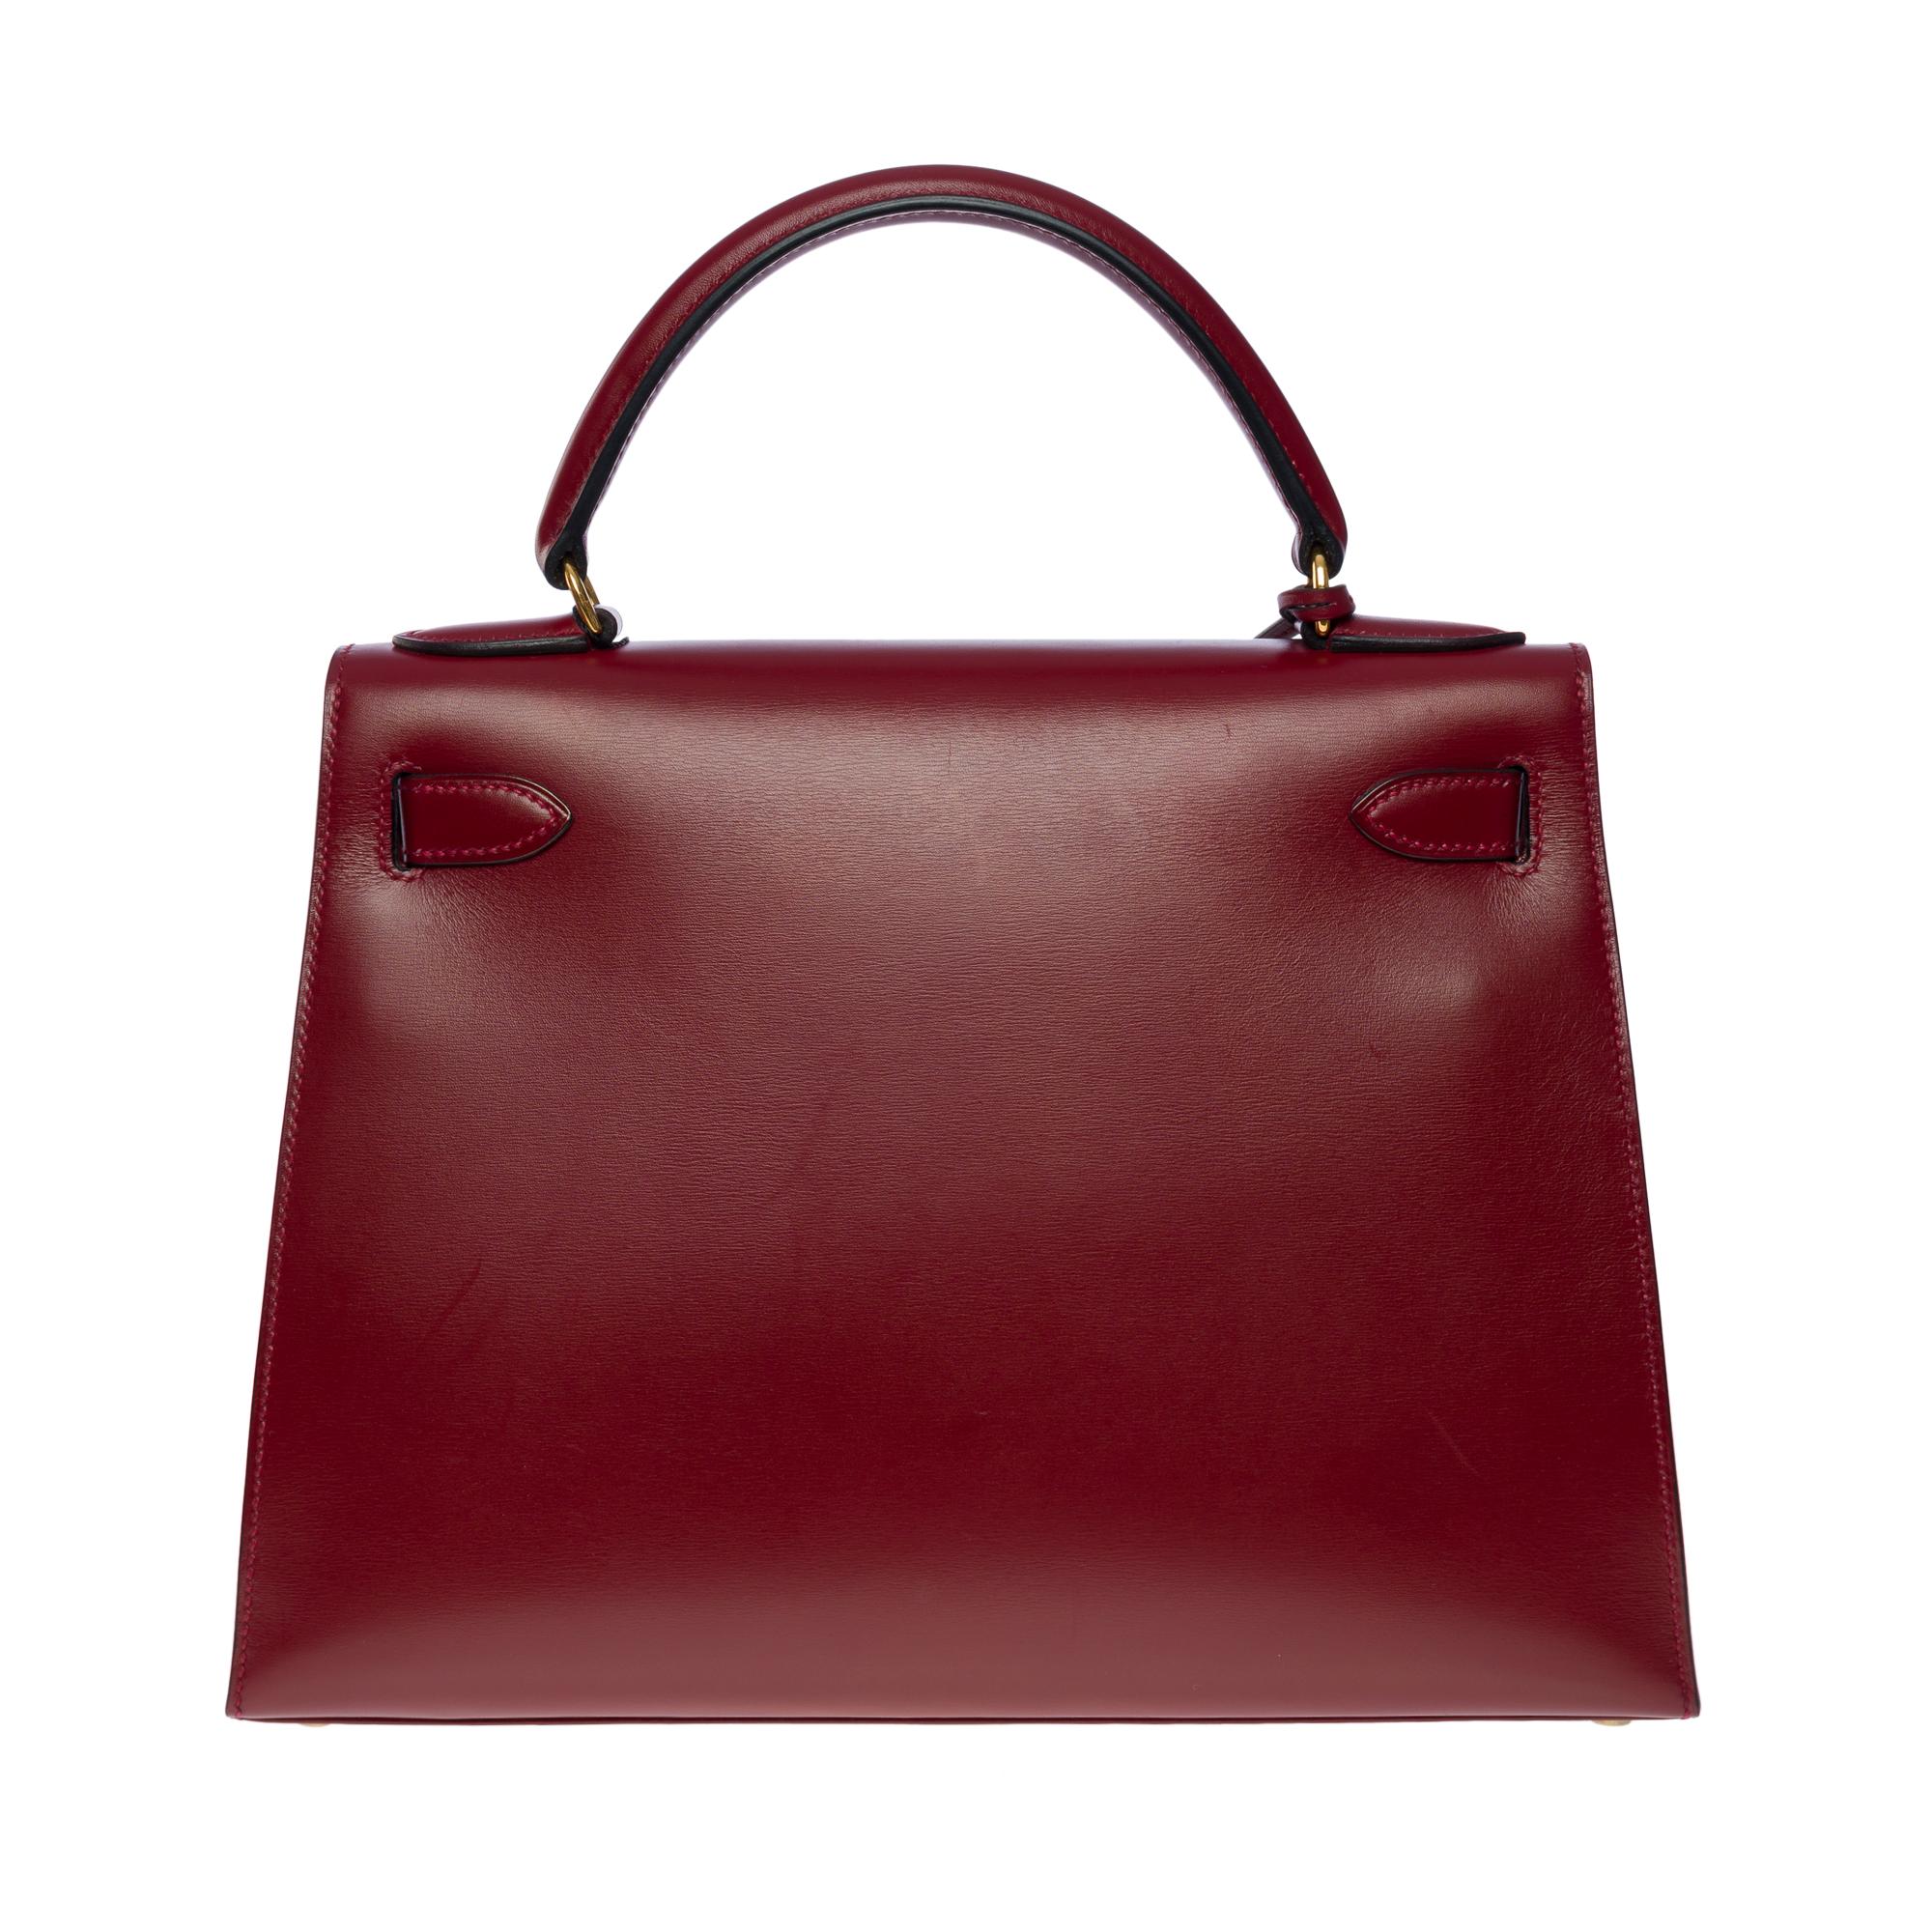 Amazing Hermes Kelly 28 sellier handbag strap in Rouge H box calf leather, GHW In Excellent Condition In Paris, IDF